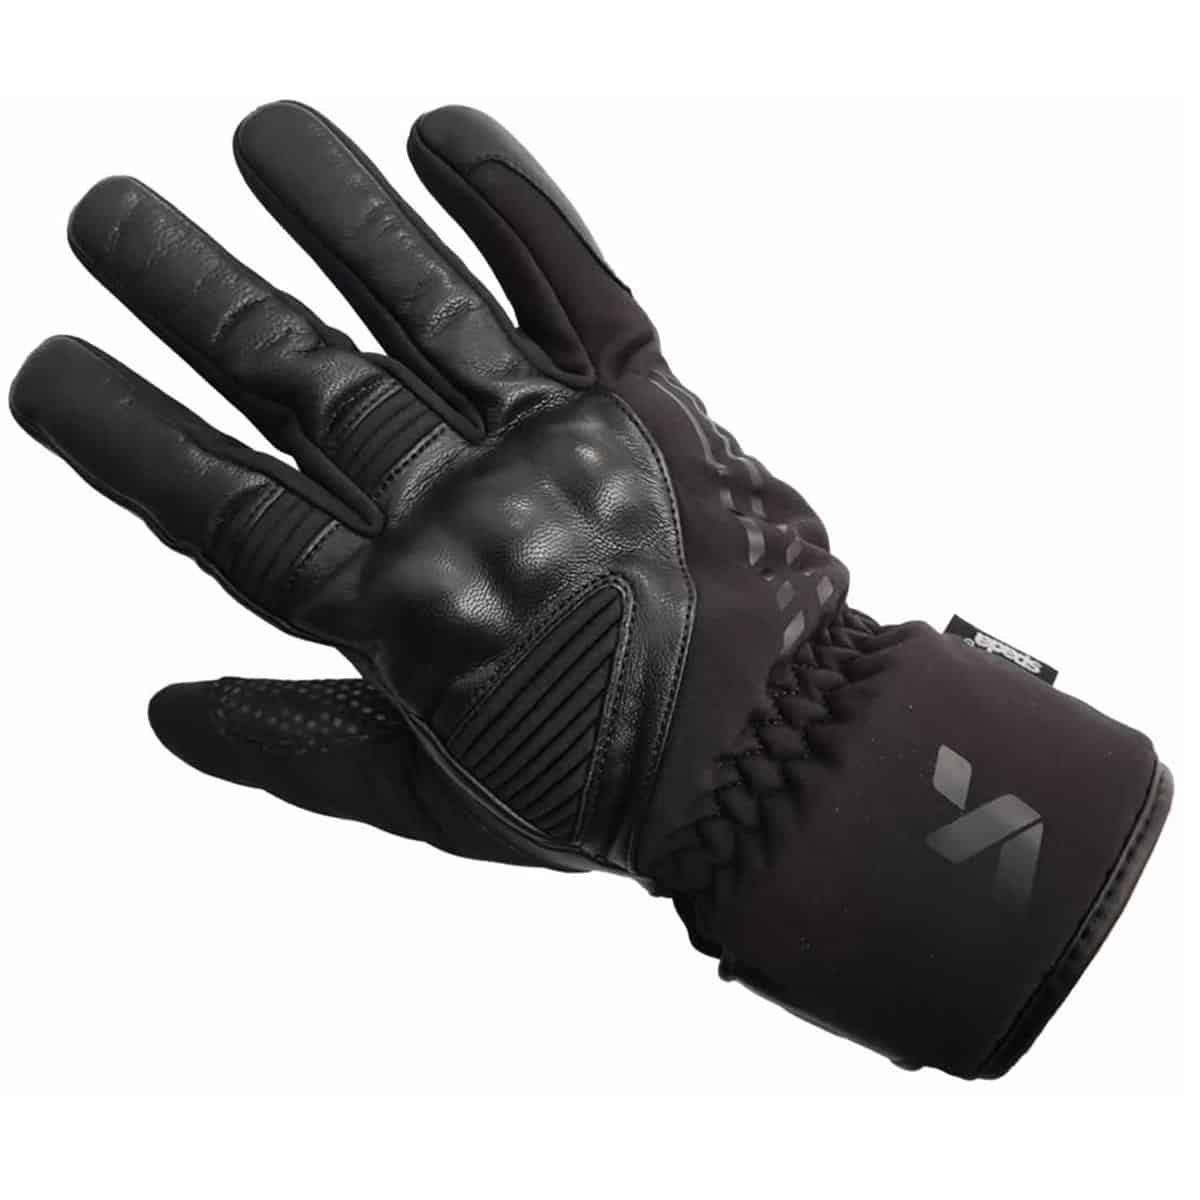 Spada Oslo WP Gloves: Waterproof gloves with additional warmth